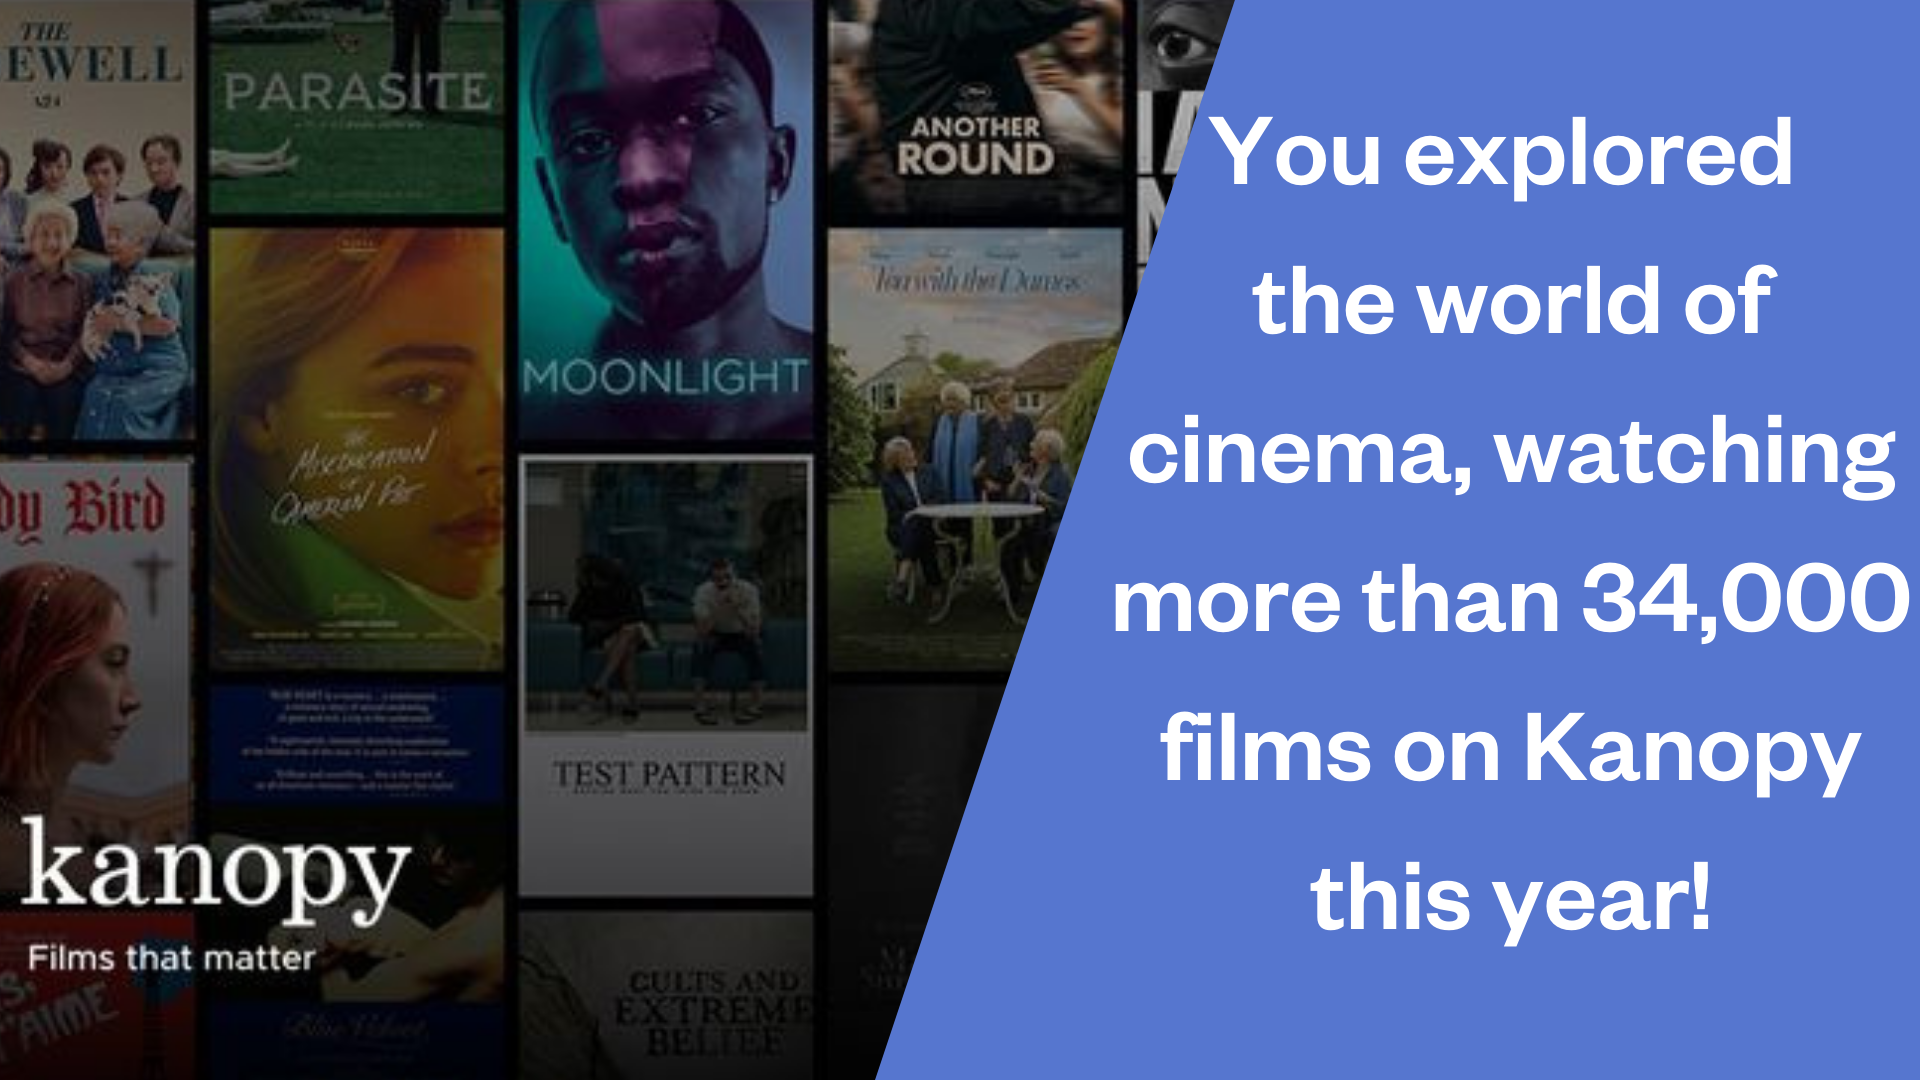 You explored the world of cinema, watching more than 34,000 films on Kanopy this year! 